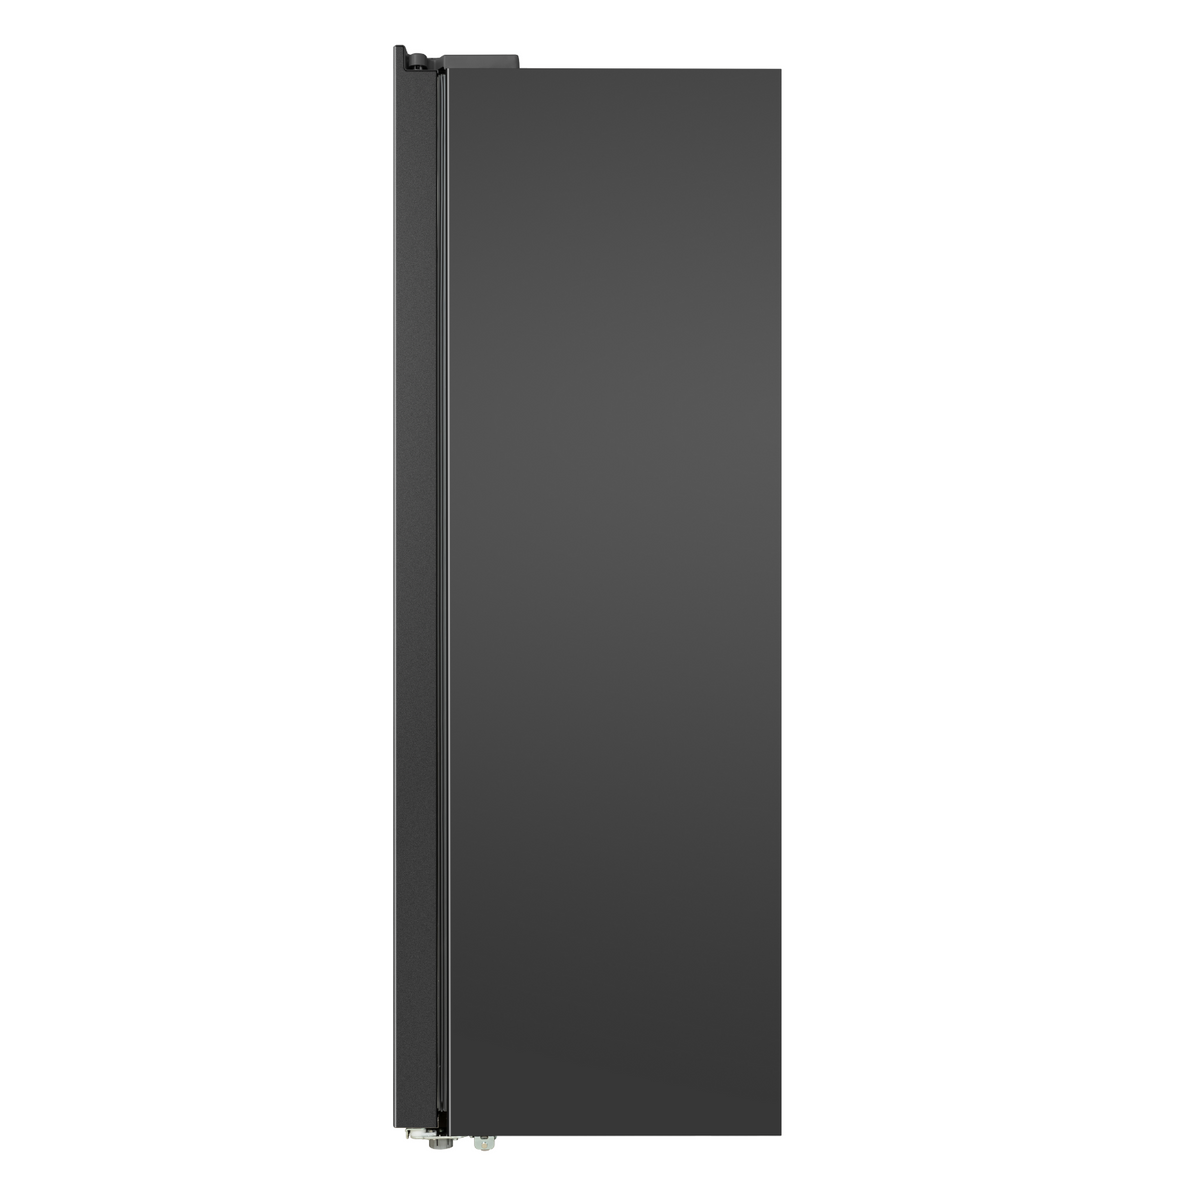 TCL 503L 92CM Non plumbed water dispenser Side by Side Freestanding Fridge Freezer - Dark Silver | RP503SSF0UK from TCL - DID Electrical